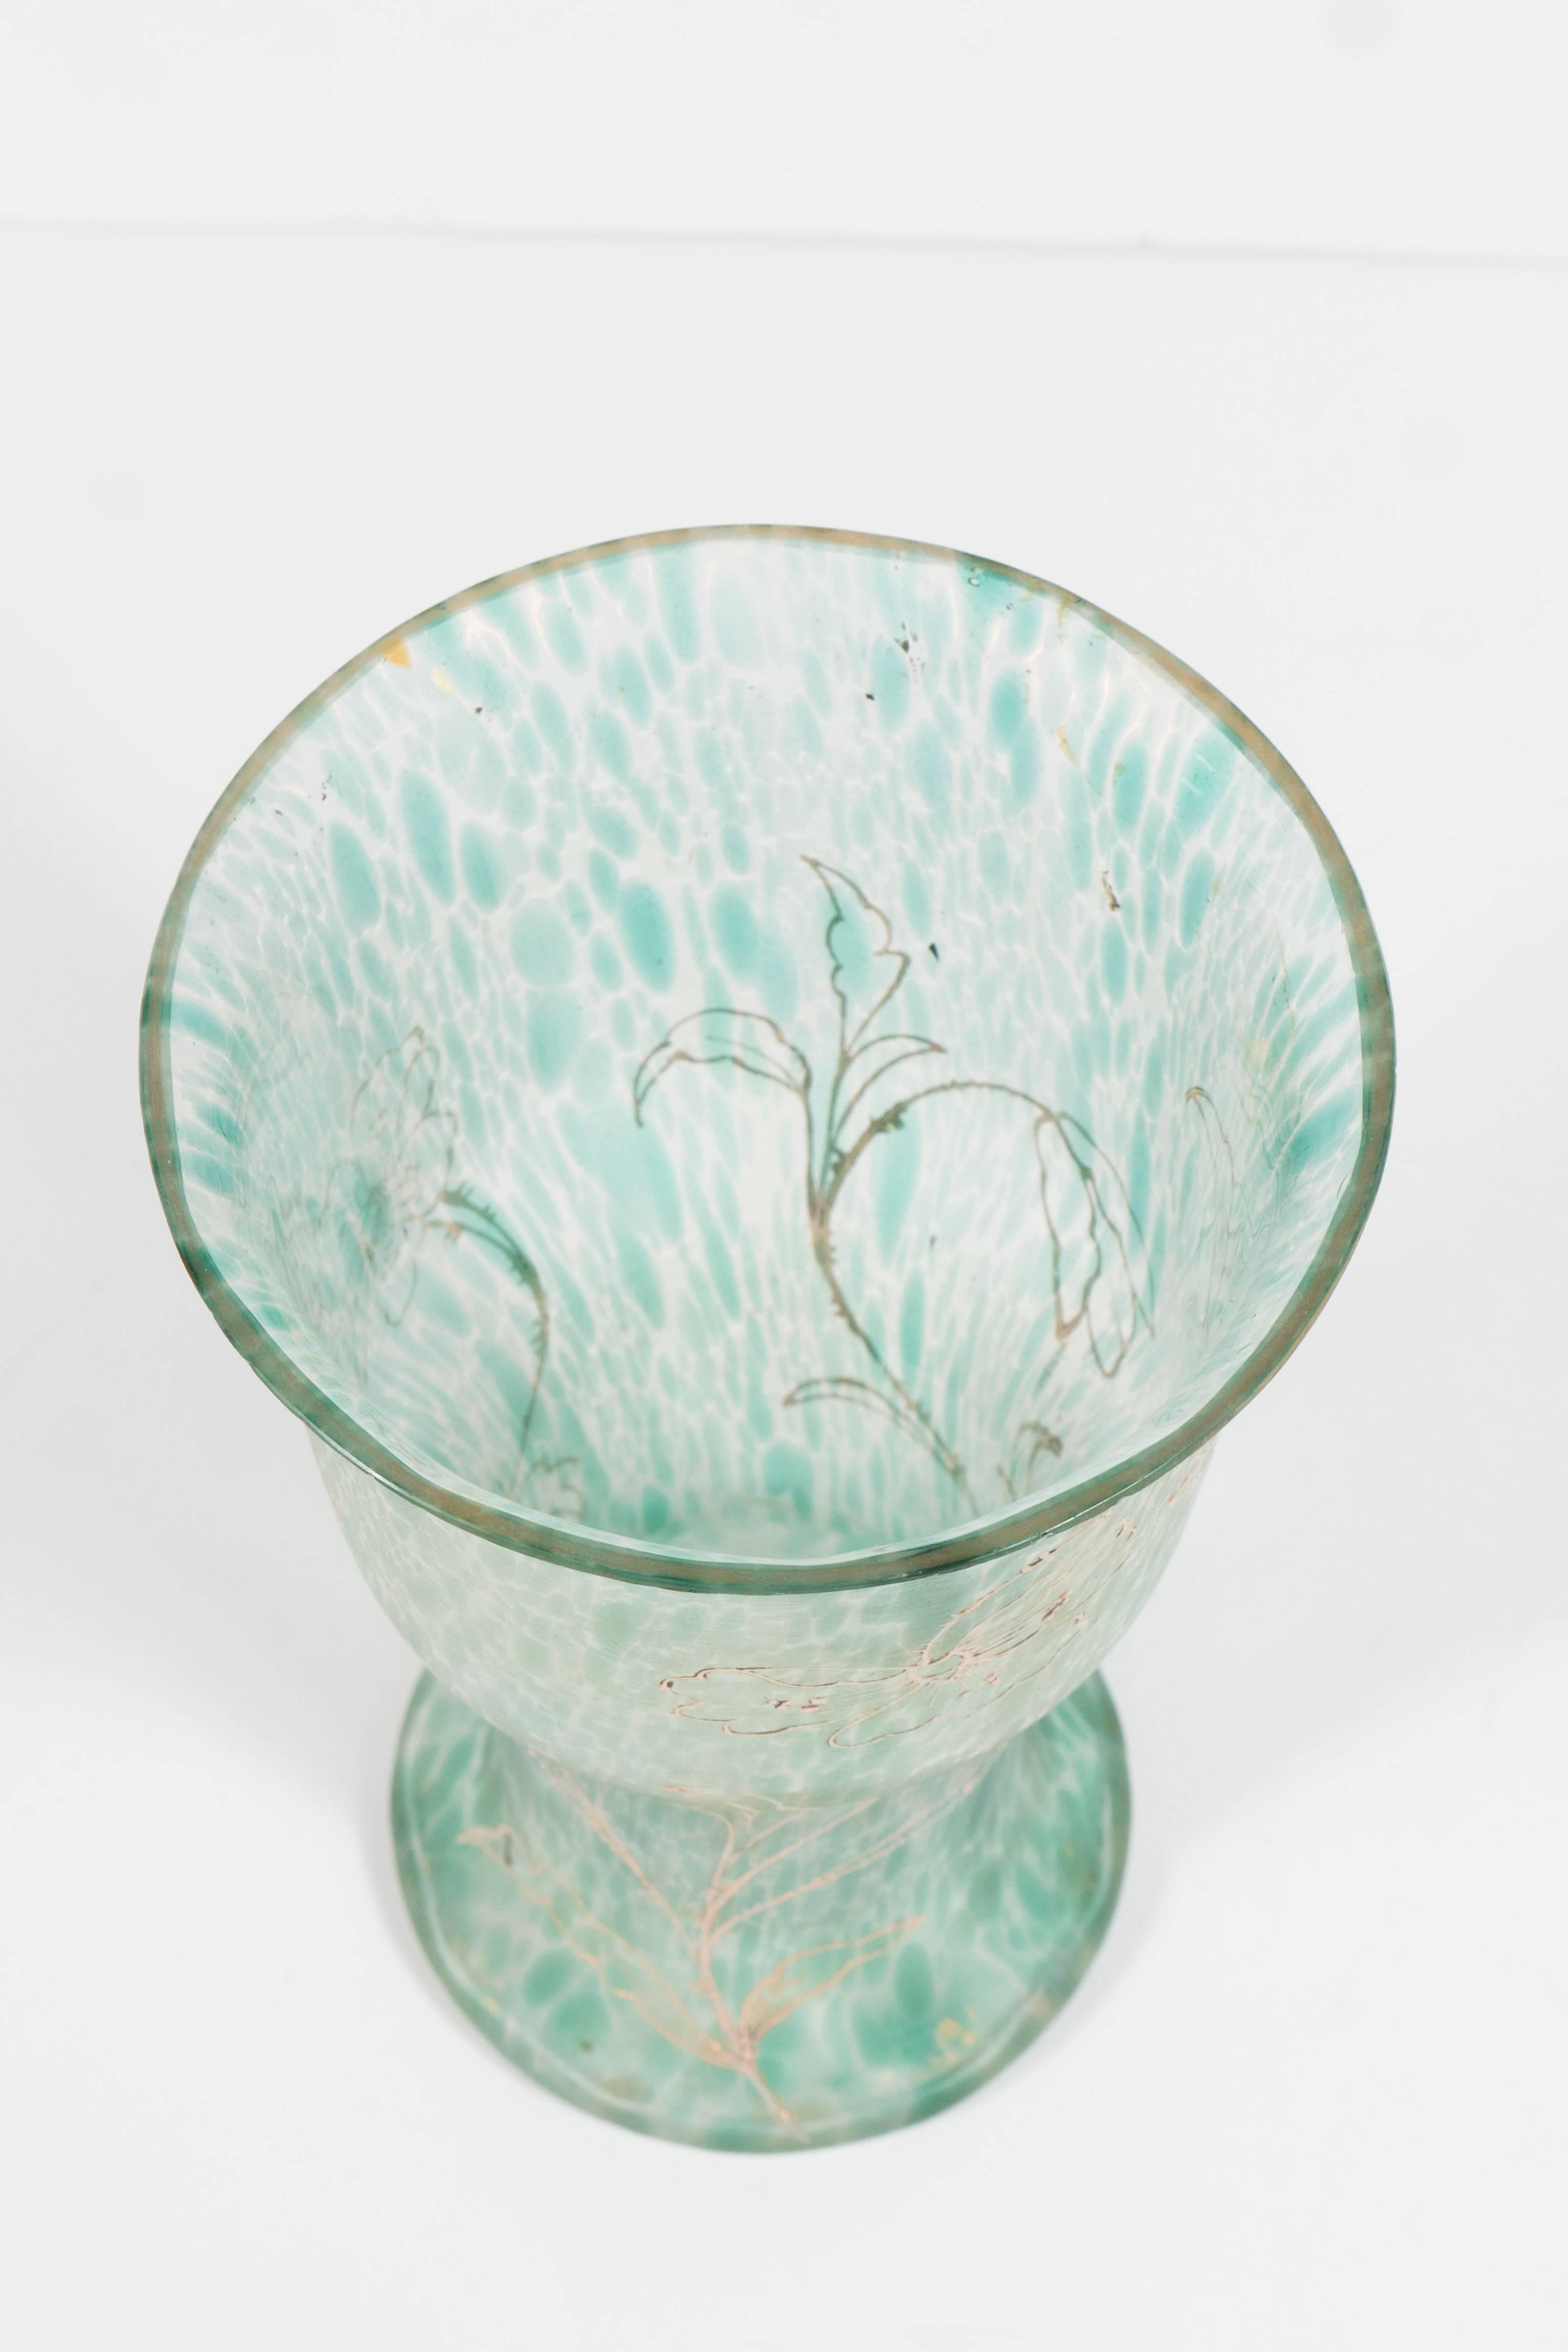 This gorgeous Art Nouveau handblown glass vase features a mottled pattern throughout, consisting of a constellation of celadon flecks suspended in translucent glass. A scrolling foliate pattern resembling a blooming poppy plant is inscribed on the